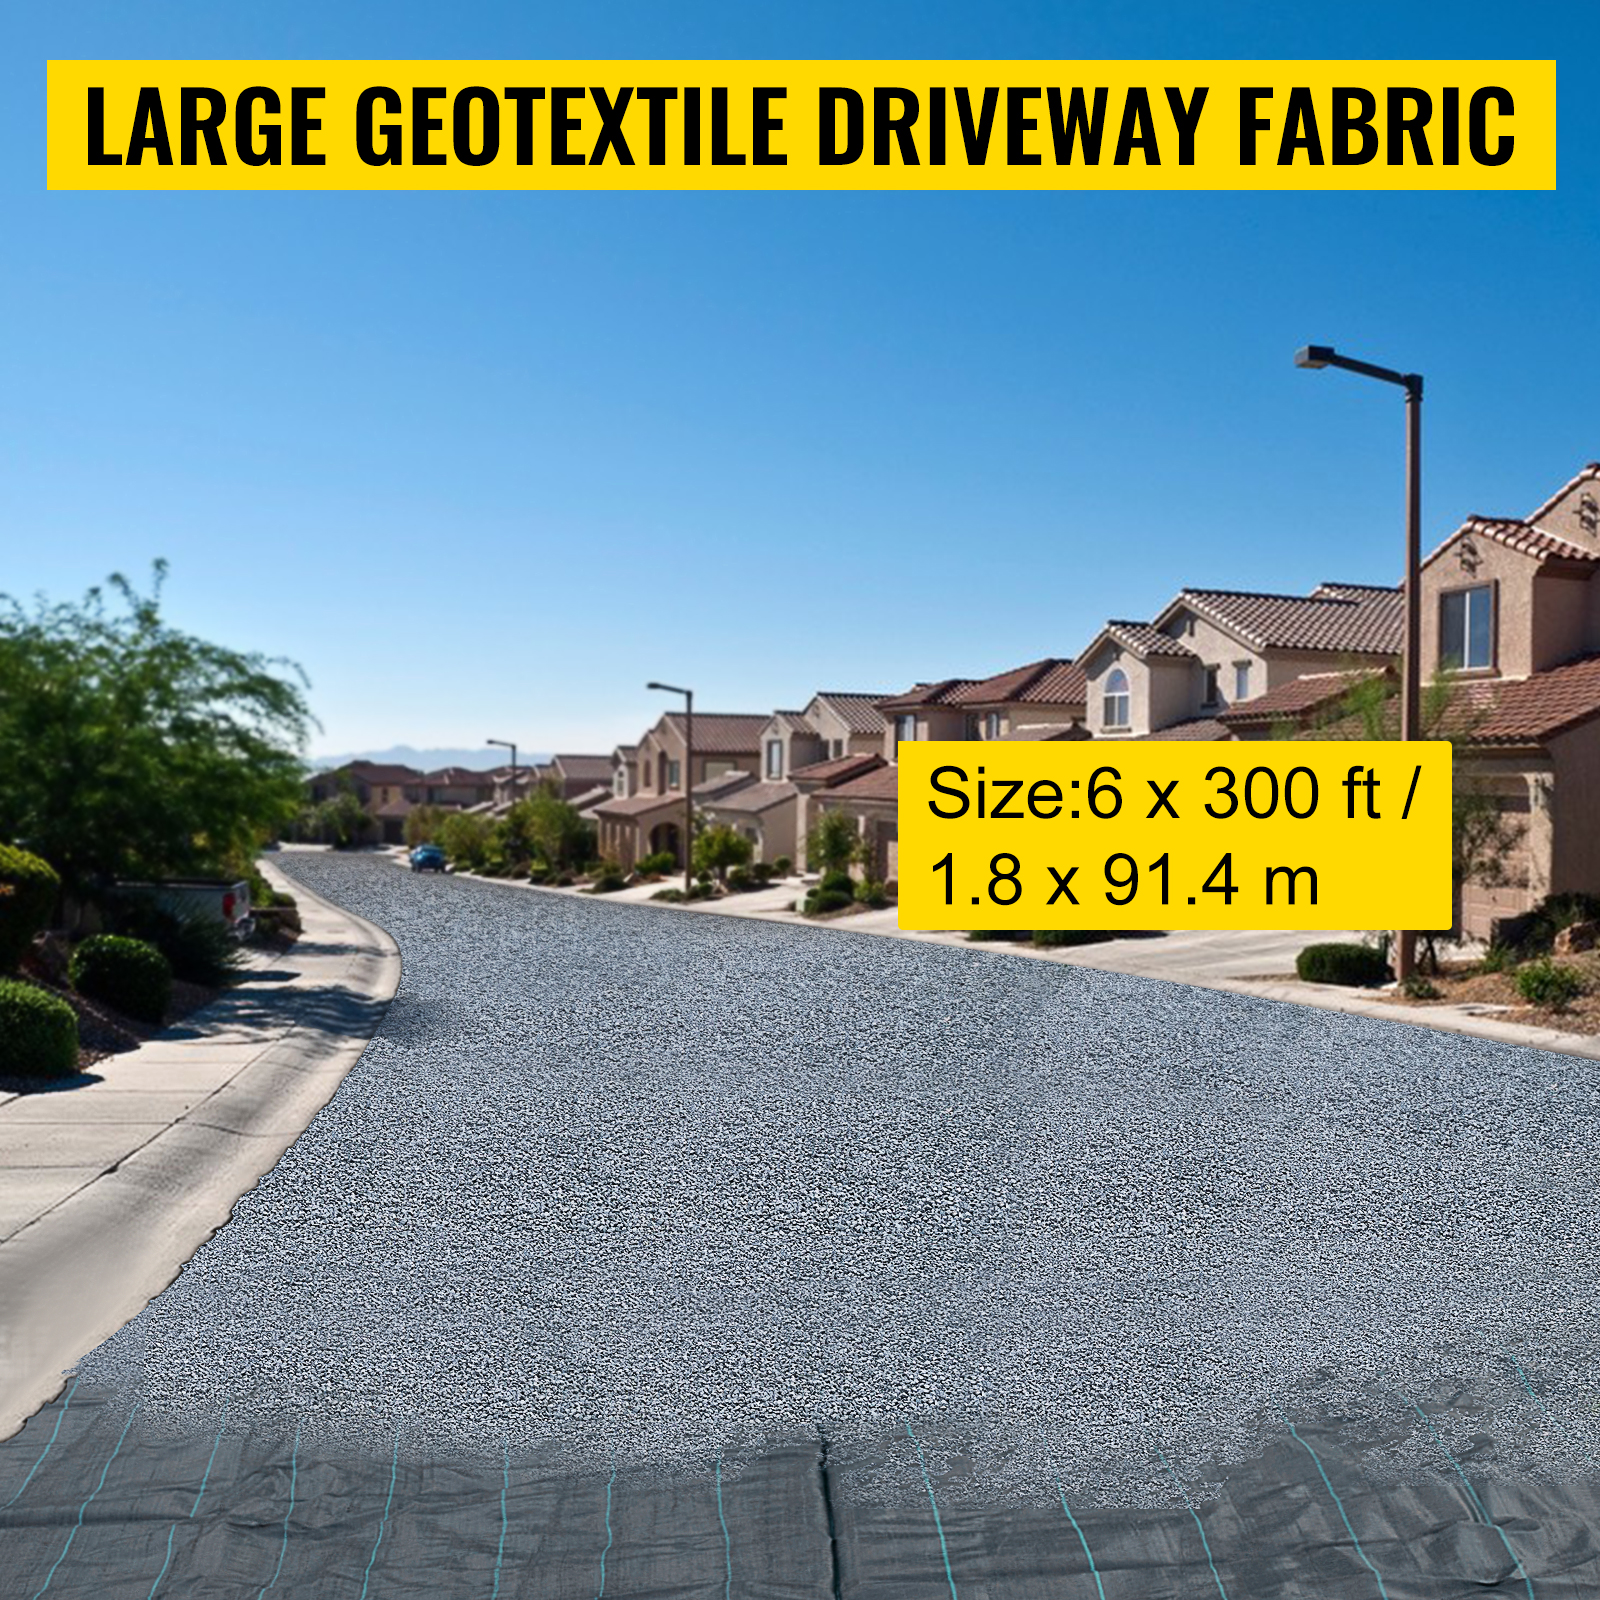 Landscape Fabric Heavy Duty 3.5OZ French Drain Fabric for Erosion Control,Landscape Fabric,Weed Barrier,Construction Projects Driveway Fabric 6.5x330 ft Road Fabric Commercial Weed Barrier Fabric 